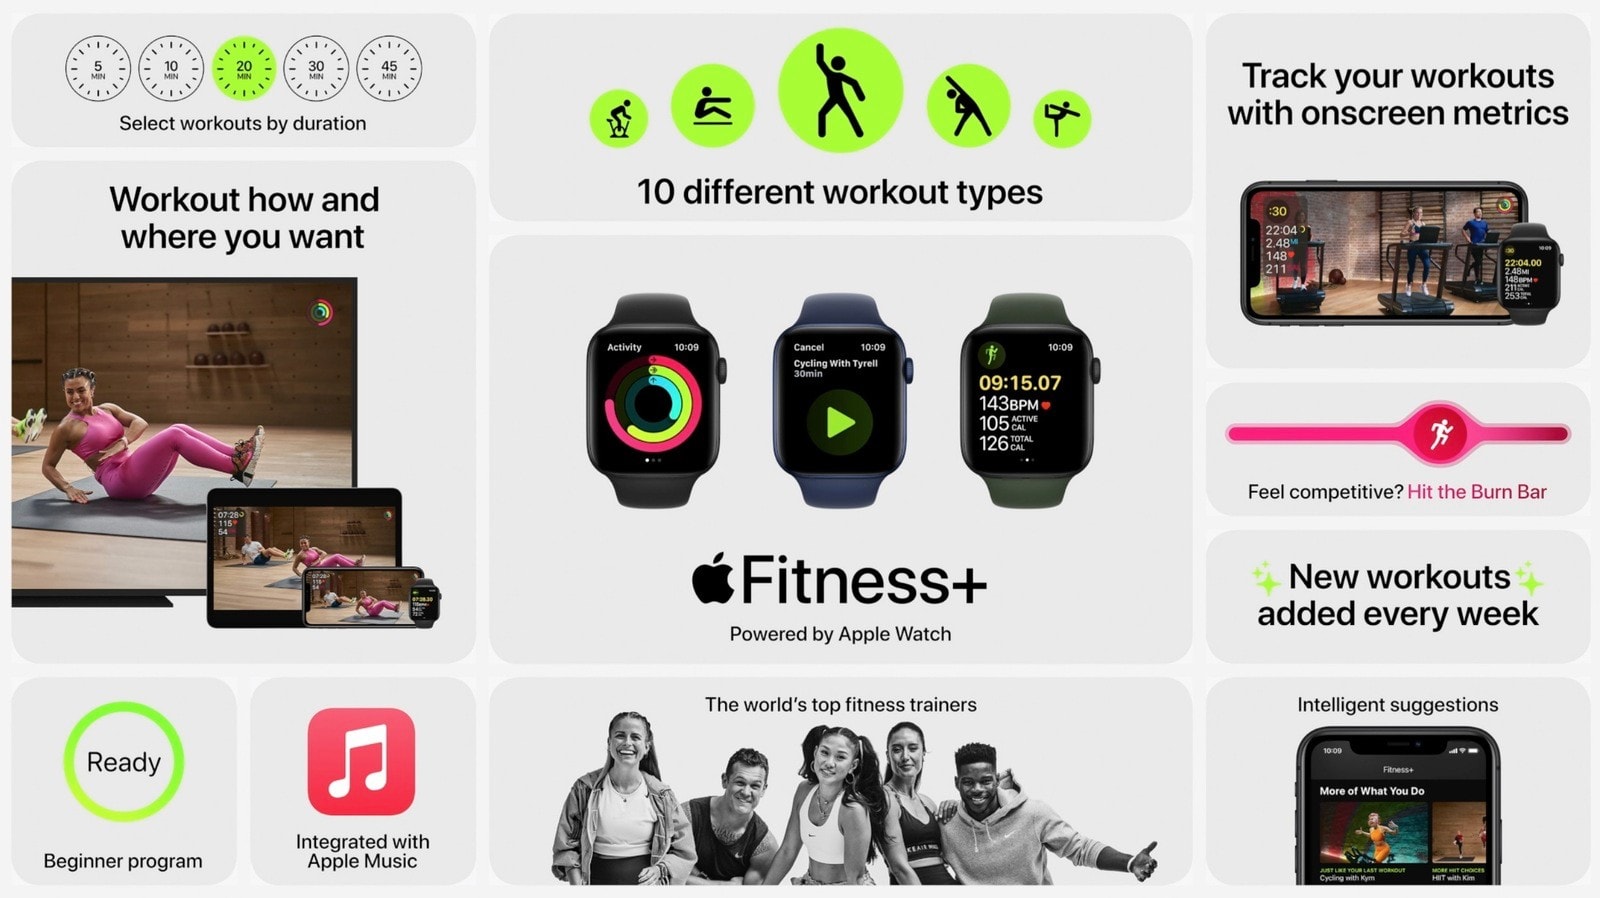 Will you be subscribing to Apple's new Fitness+ service?